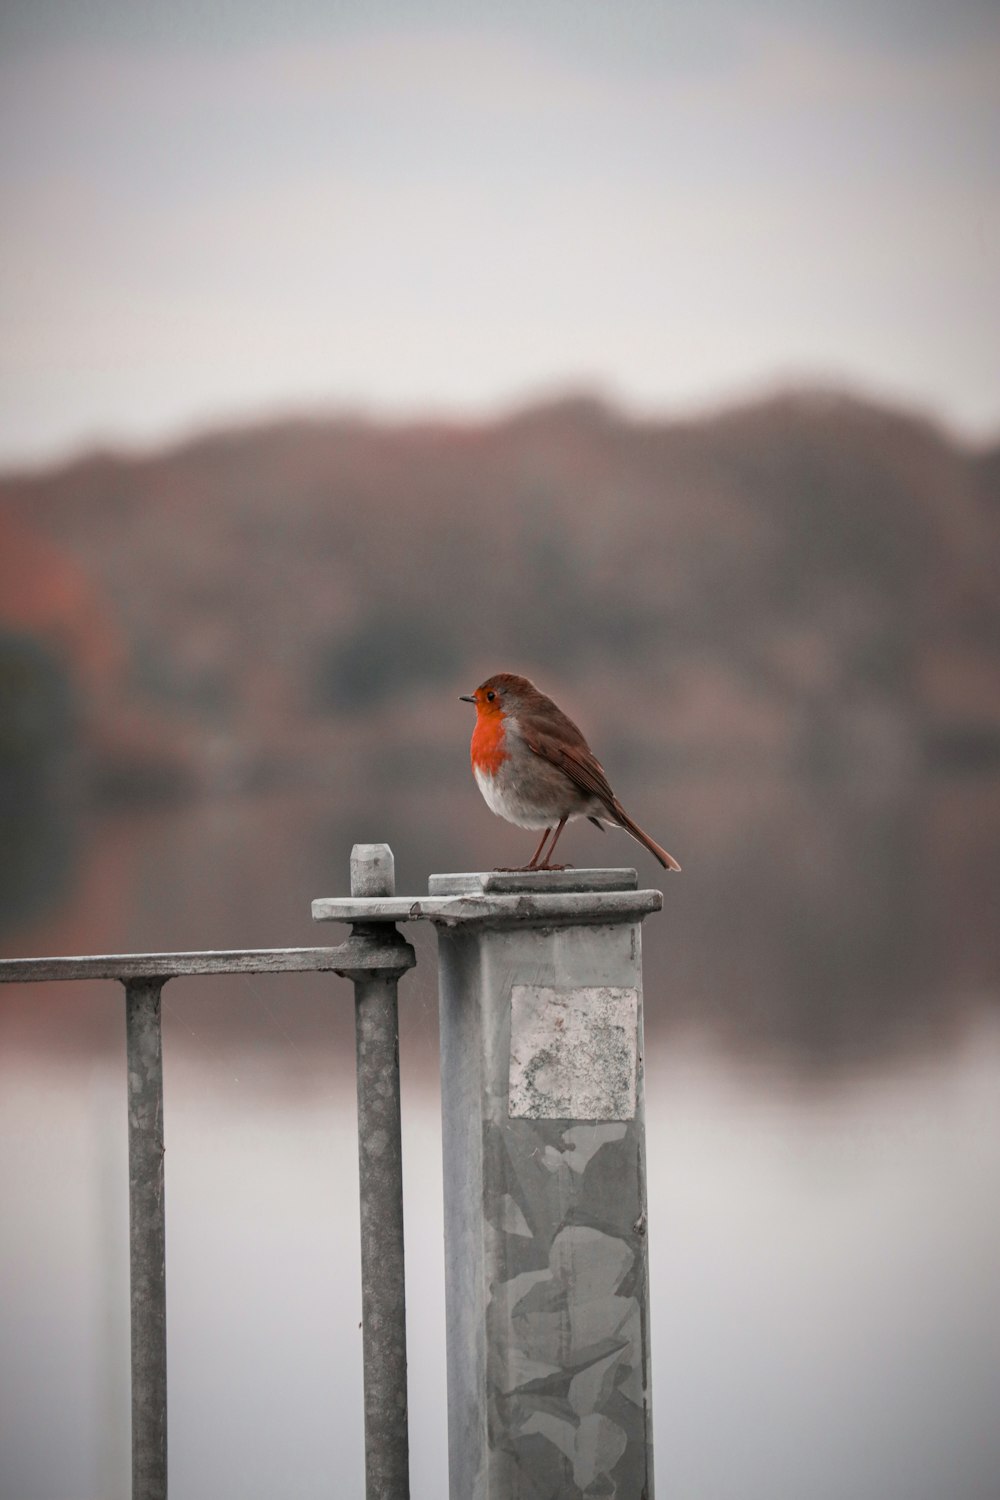 a small bird perched on top of a metal post